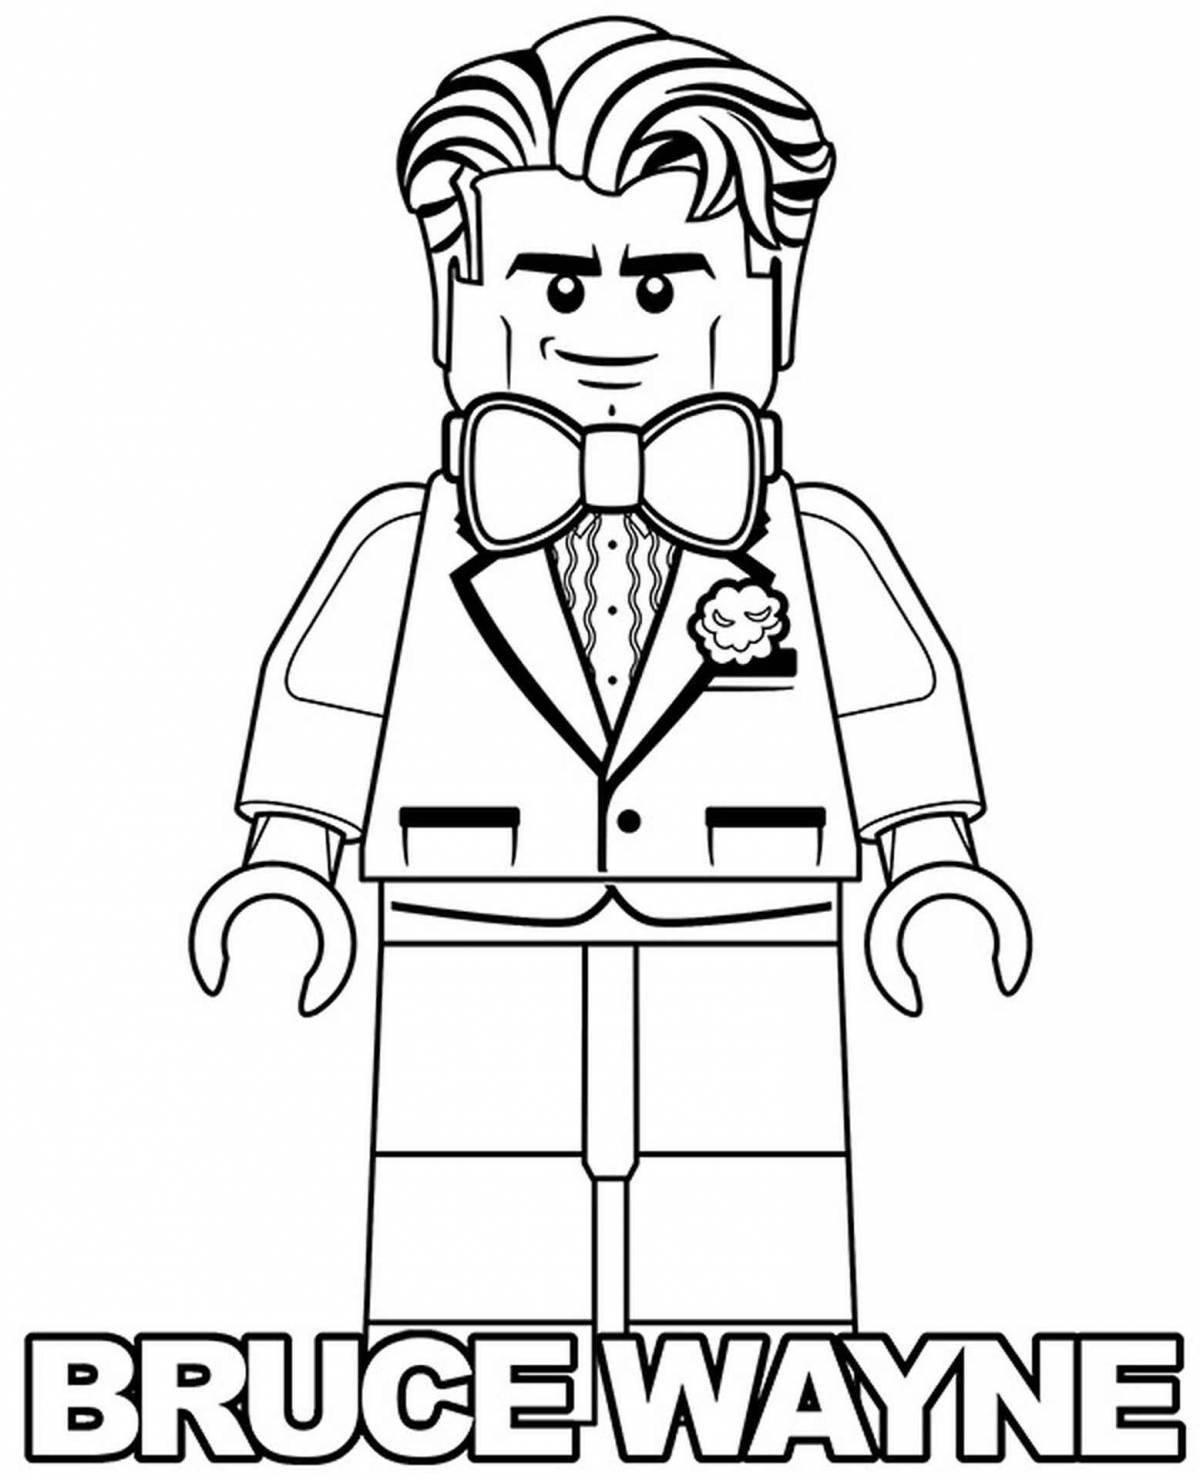 Intriguing lego zombie coloring page